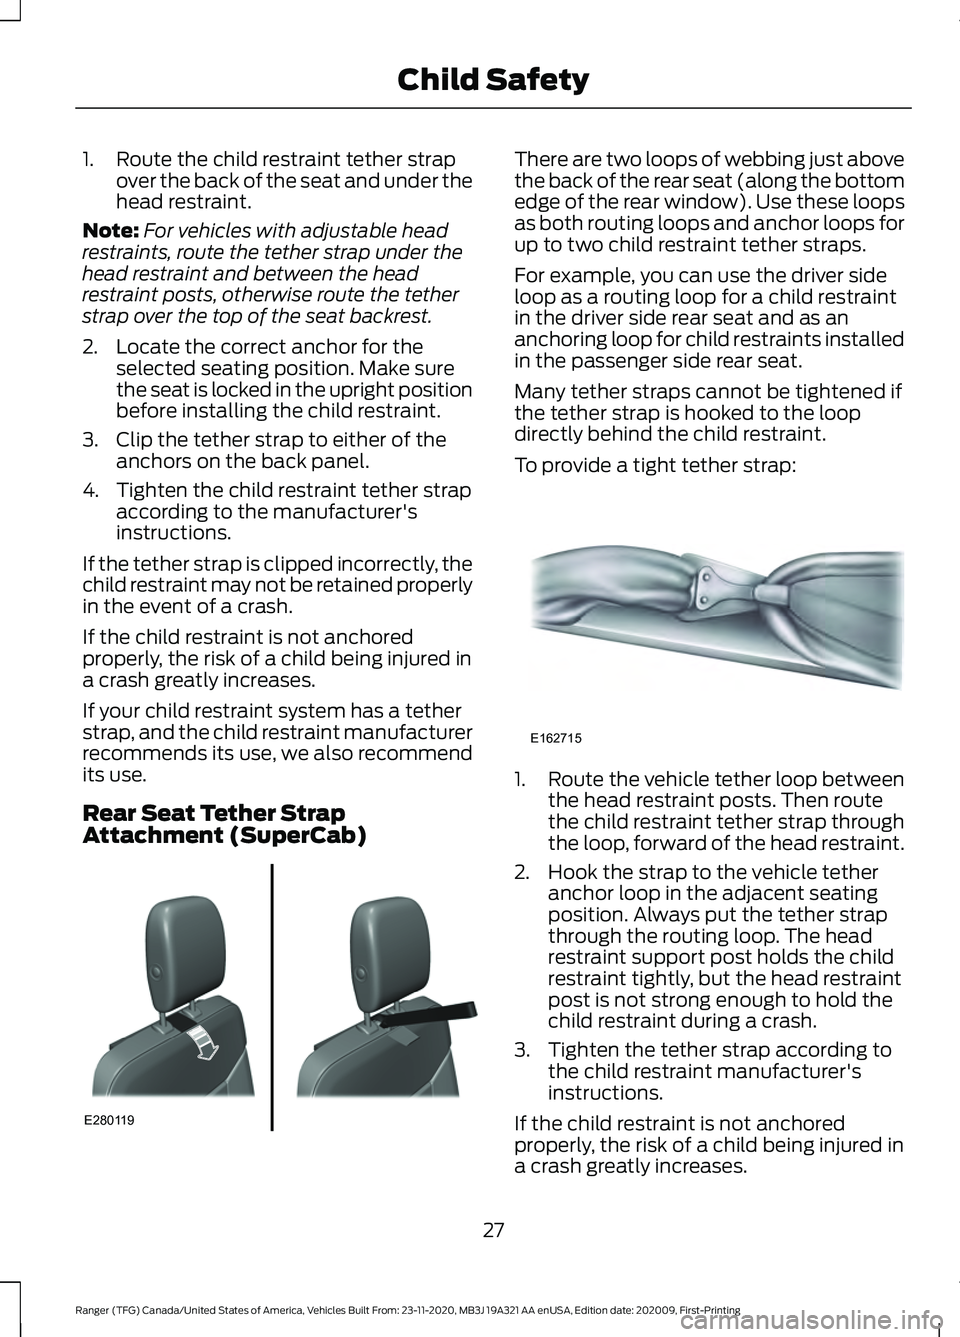 FORD RANGER 2021  Owners Manual 1. Route the child restraint tether strap
over the back of the seat and under the
head restraint.
Note: For vehicles with adjustable head
restraints, route the tether strap under the
head restraint an